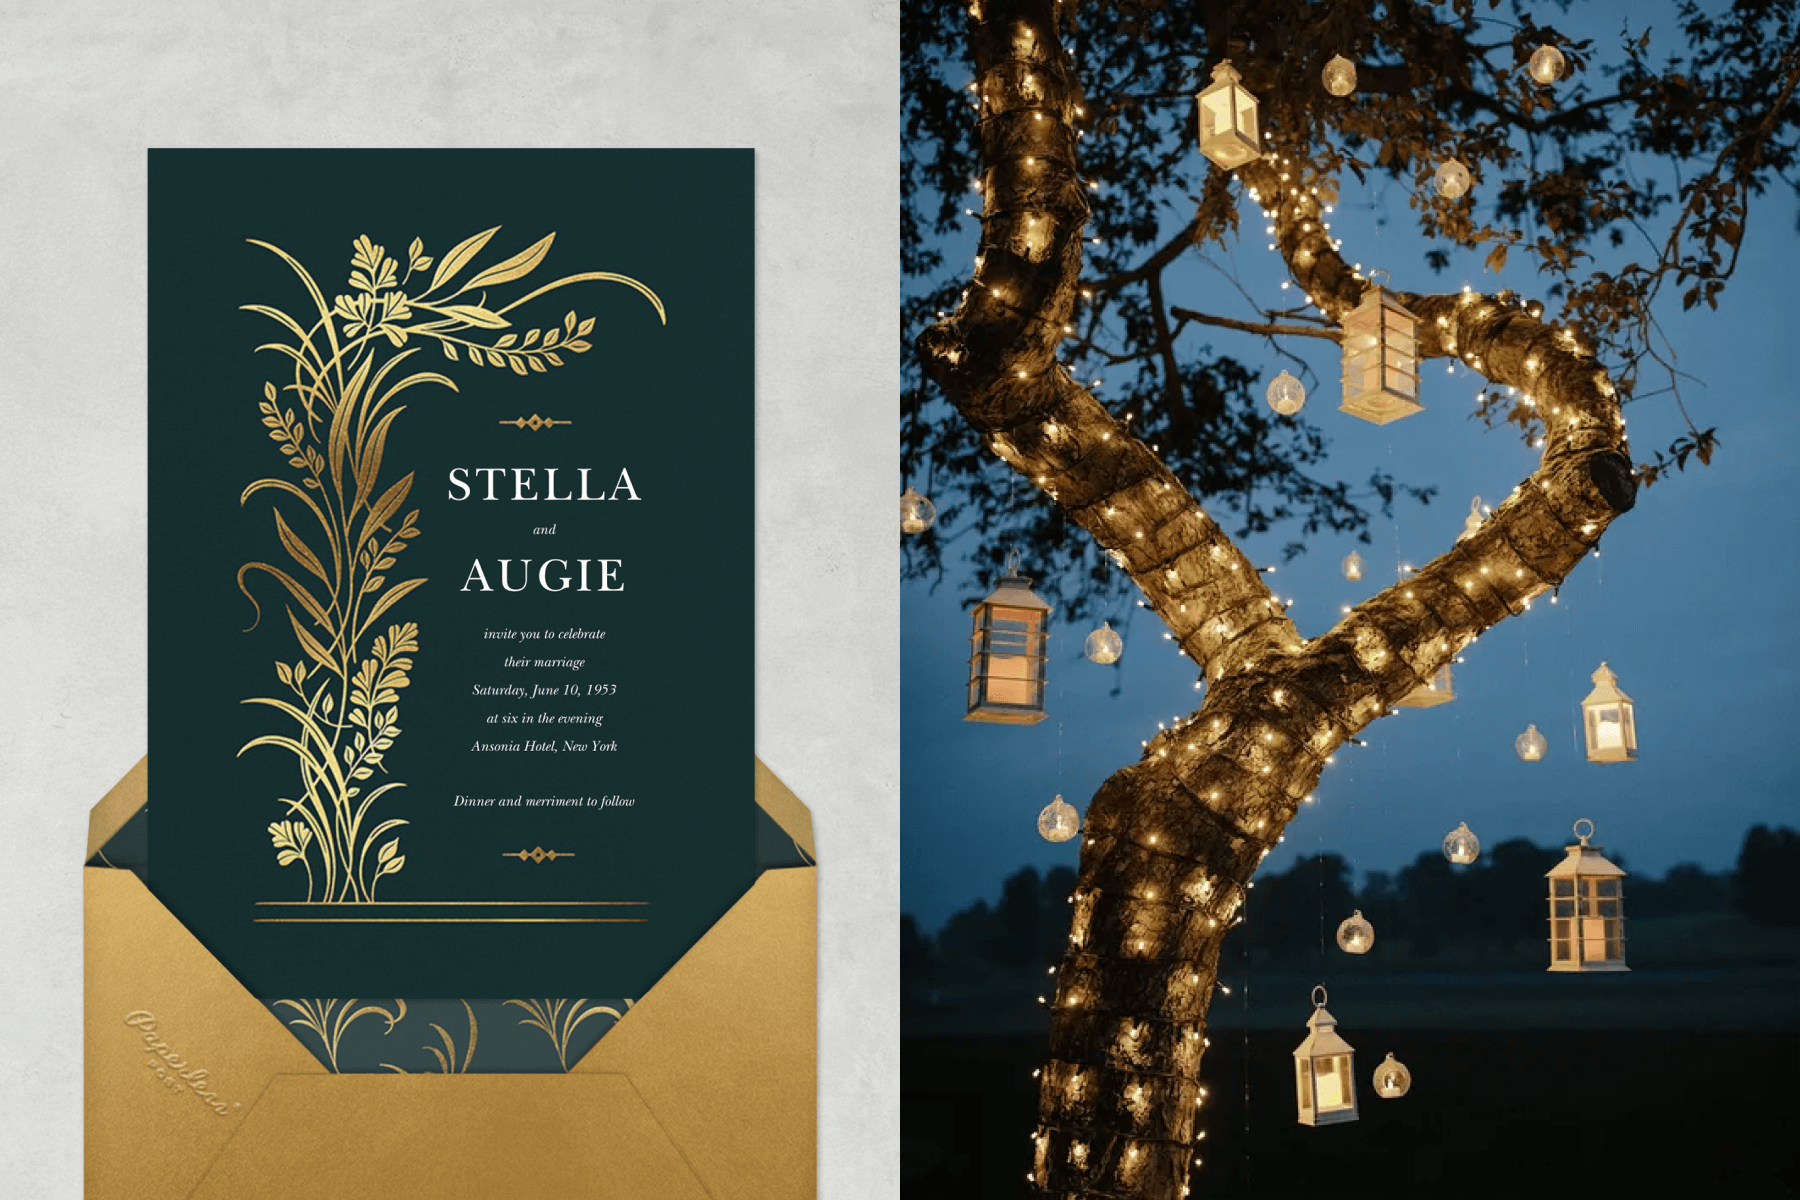 Left: forest green wedding invitation with gold greenery to the left. Right: tree in the evening wrapped with string lights and lanterns